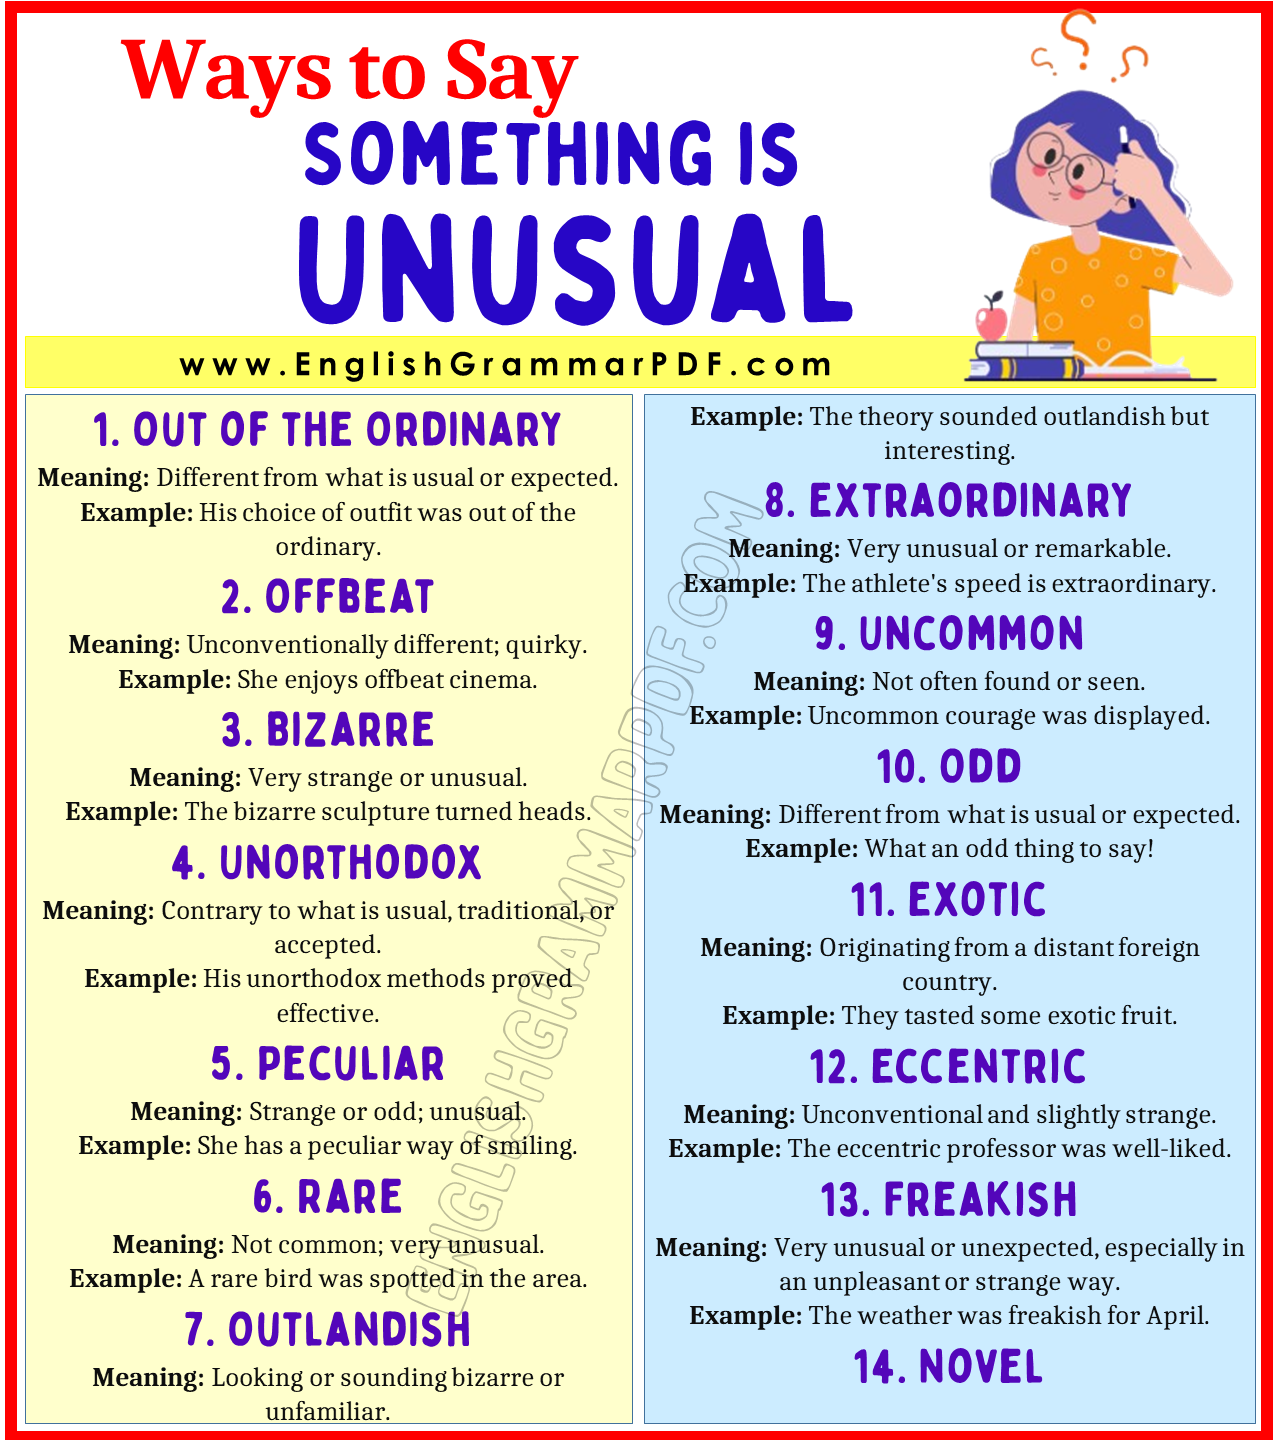 Ways to Say Something is Unusual